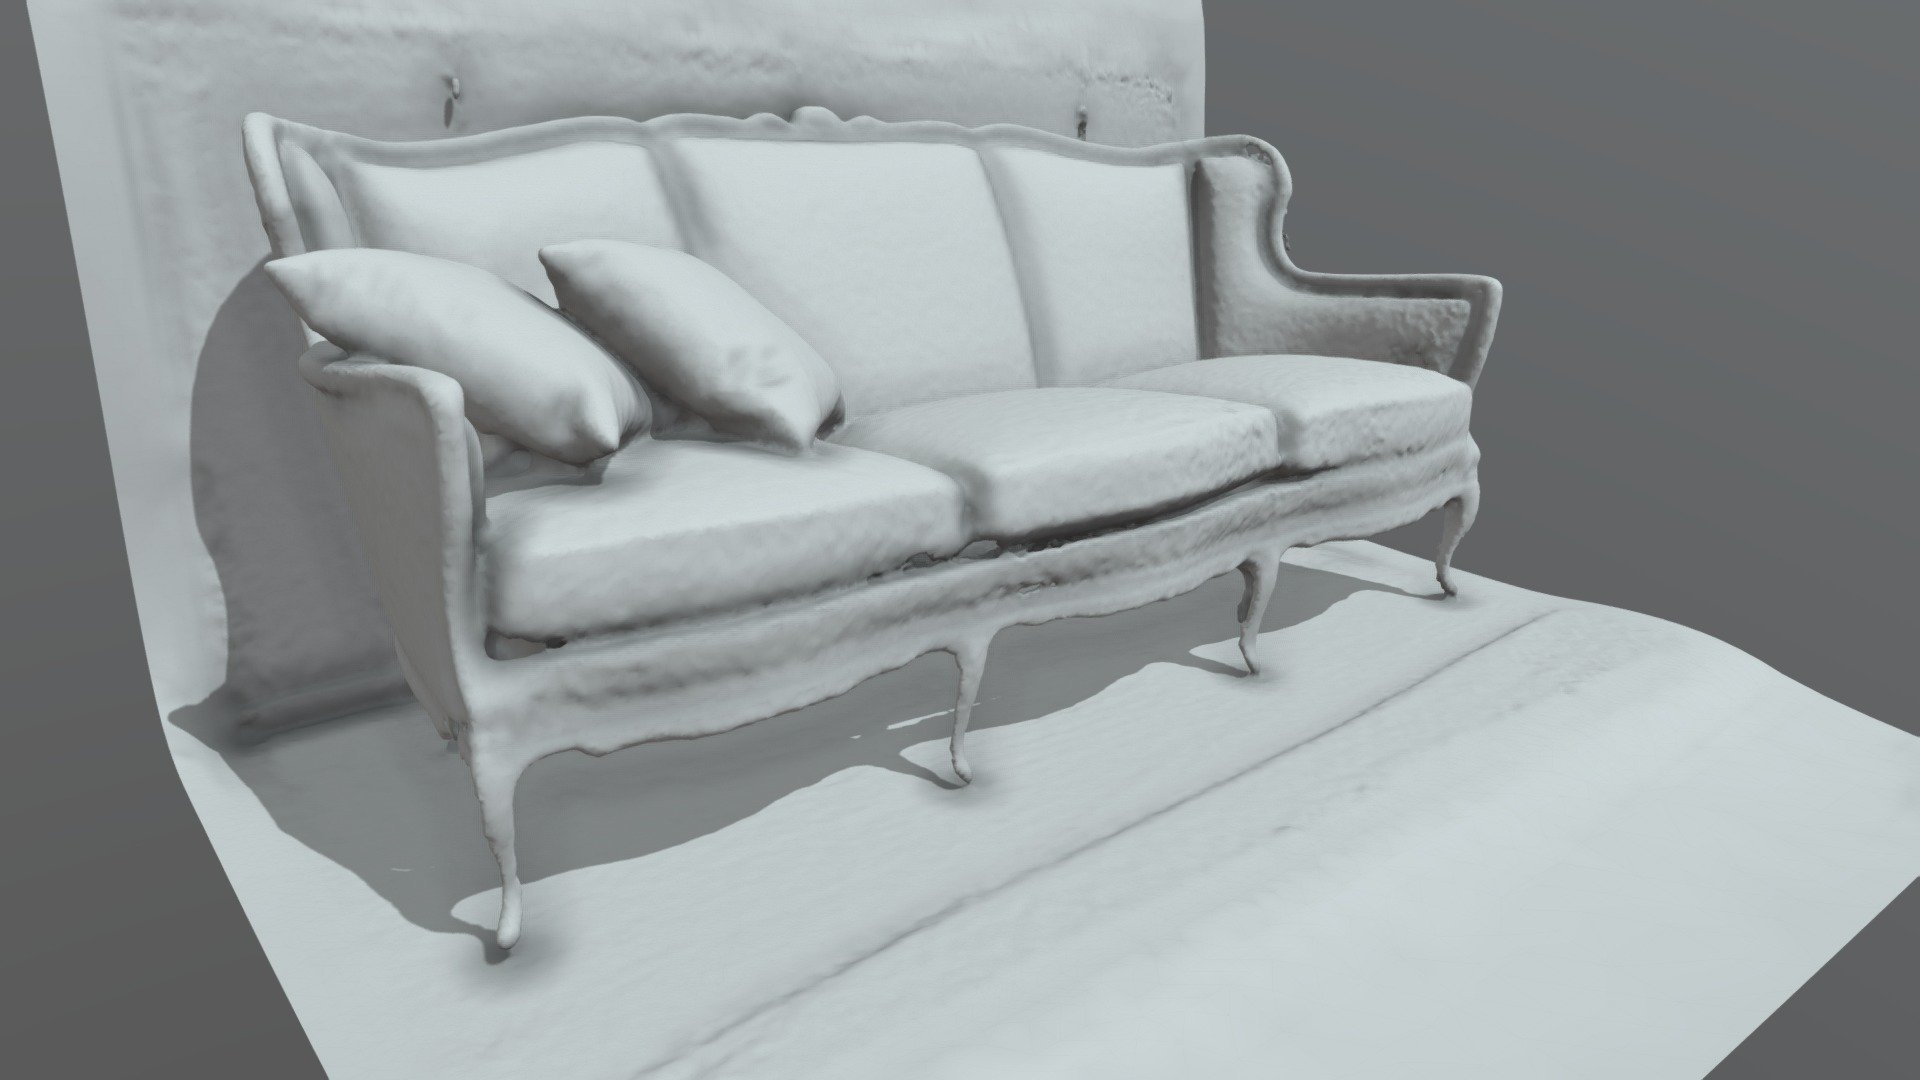 Sofa test with Structure Core on Skanect